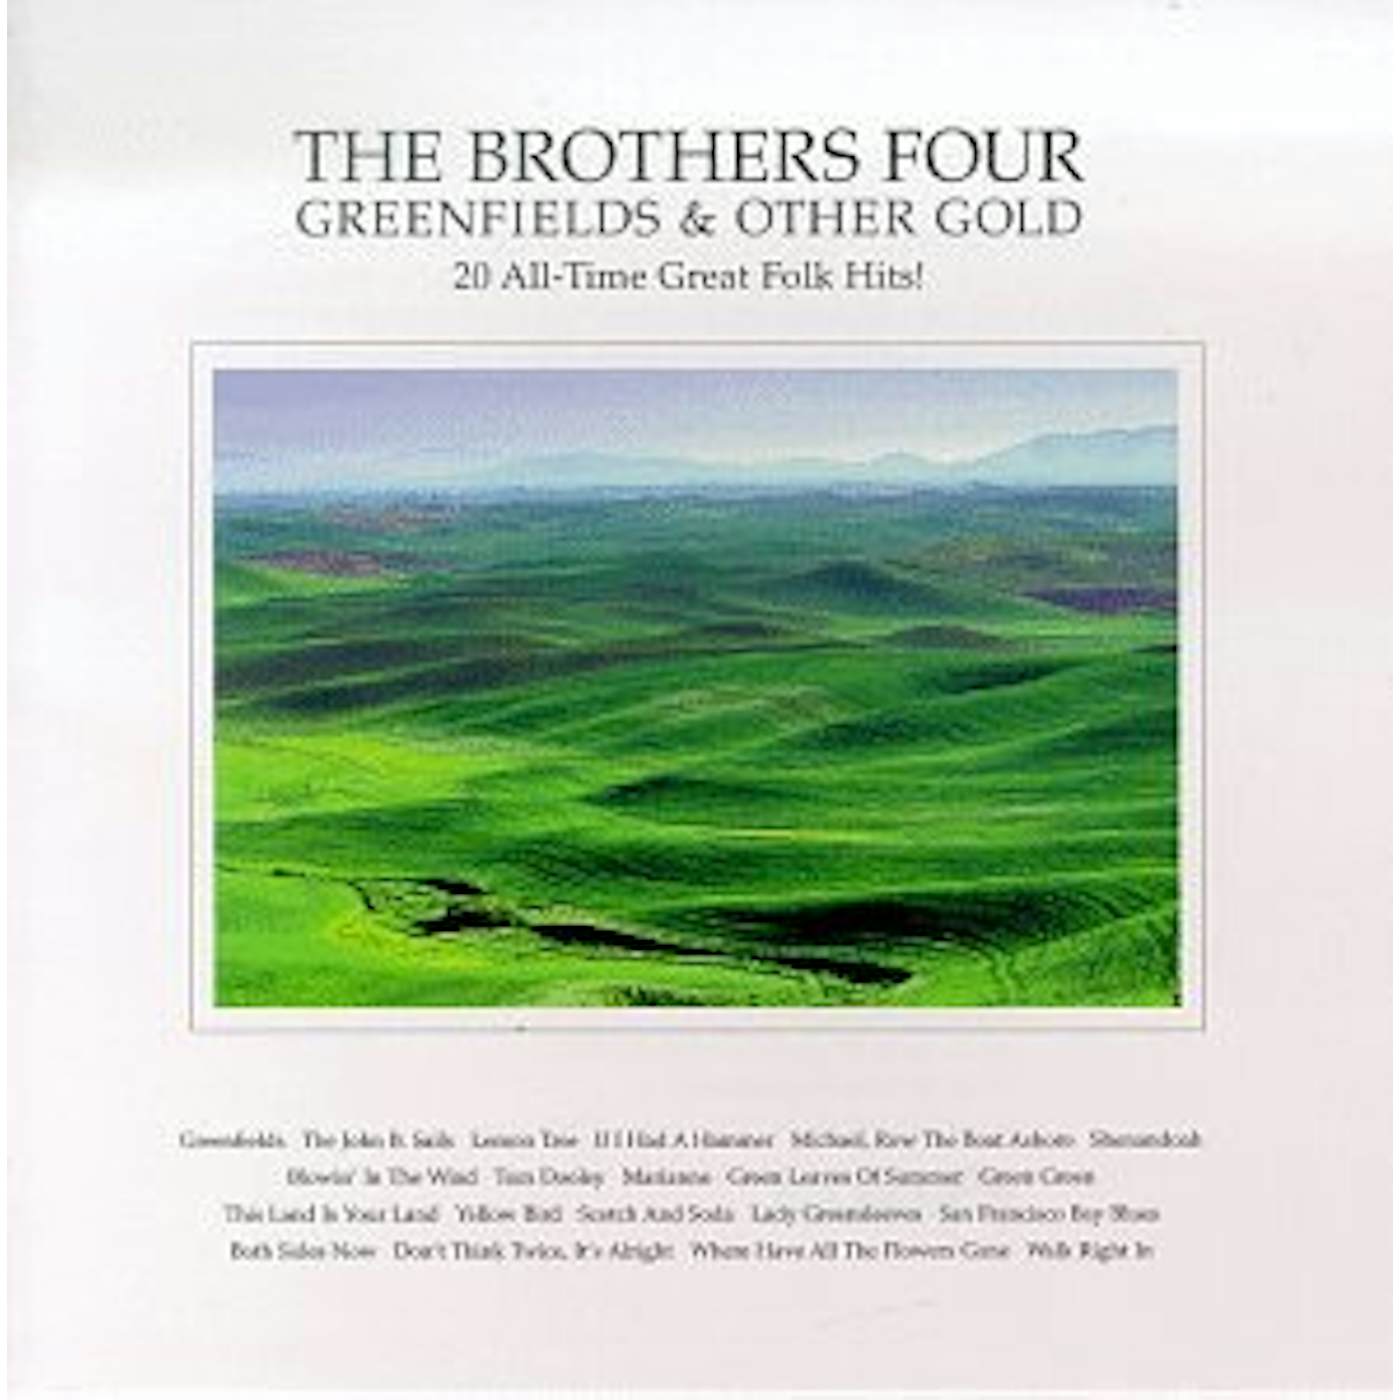 The Brothers Four GREENFIELDS & OTHER GOLD CD